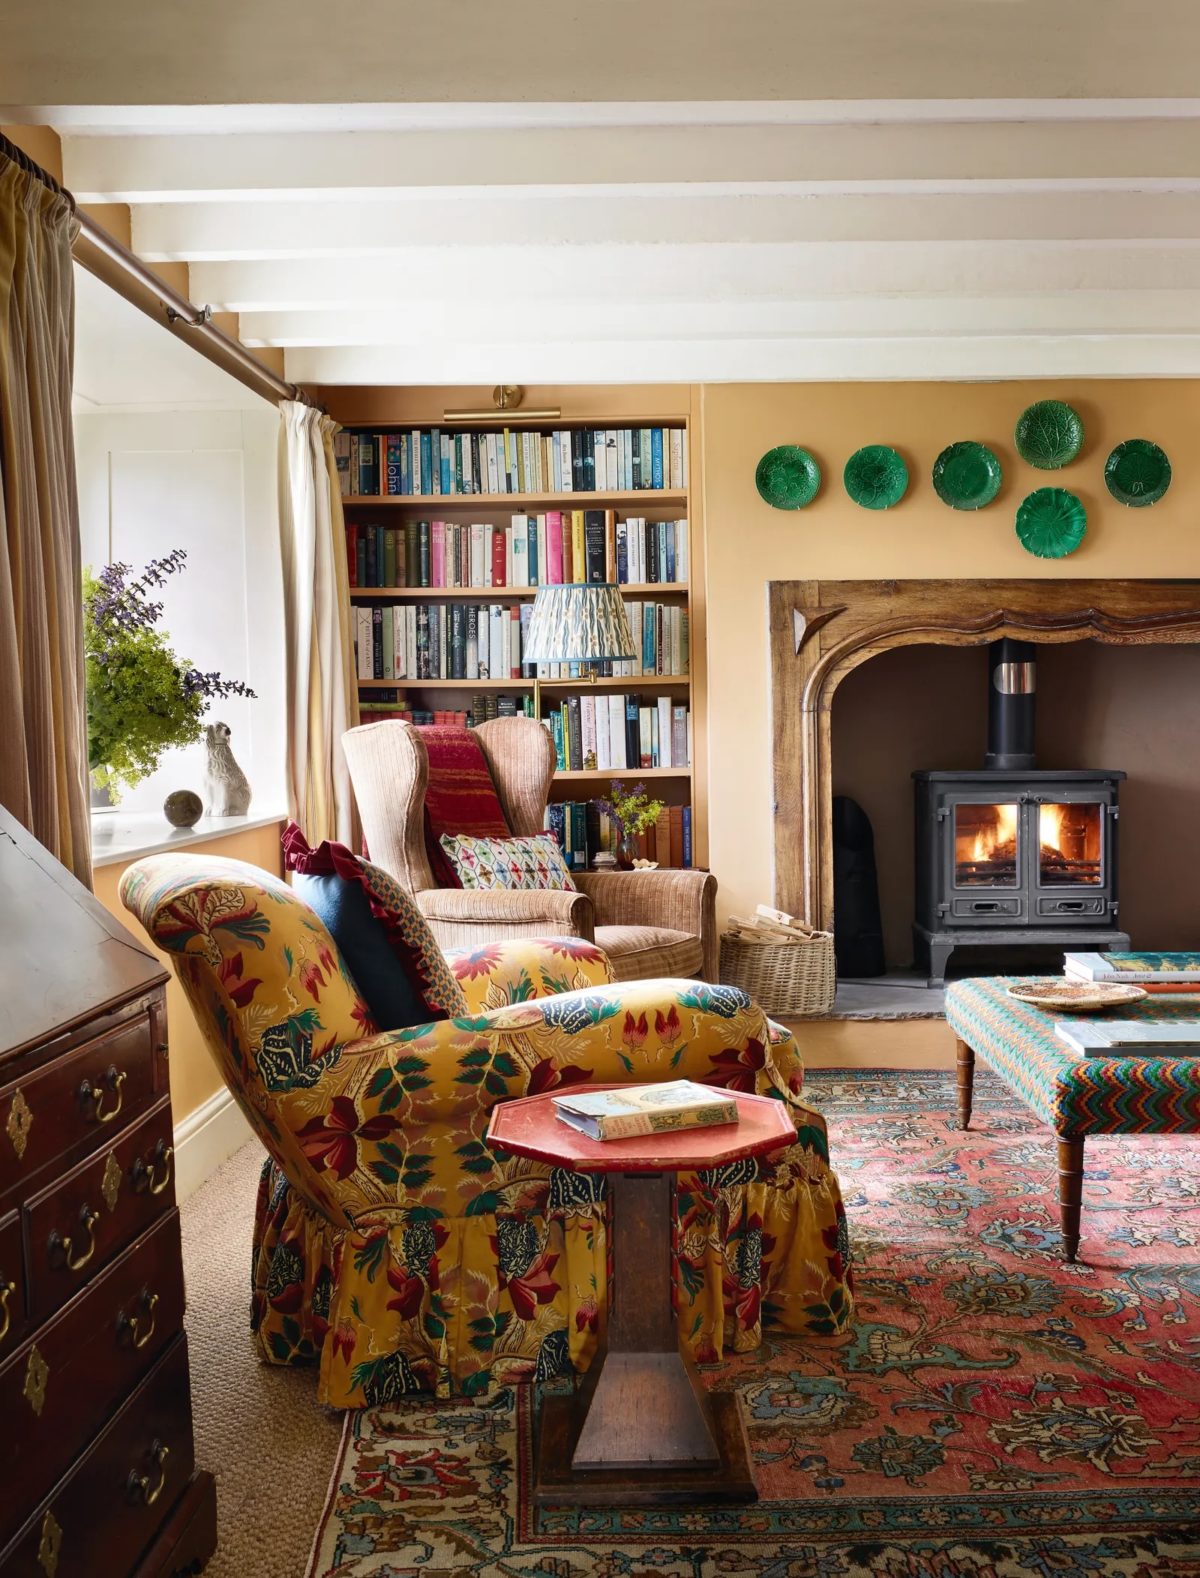 Image of a living room design by Lucinda Griffith | Photography: Rachael Smith